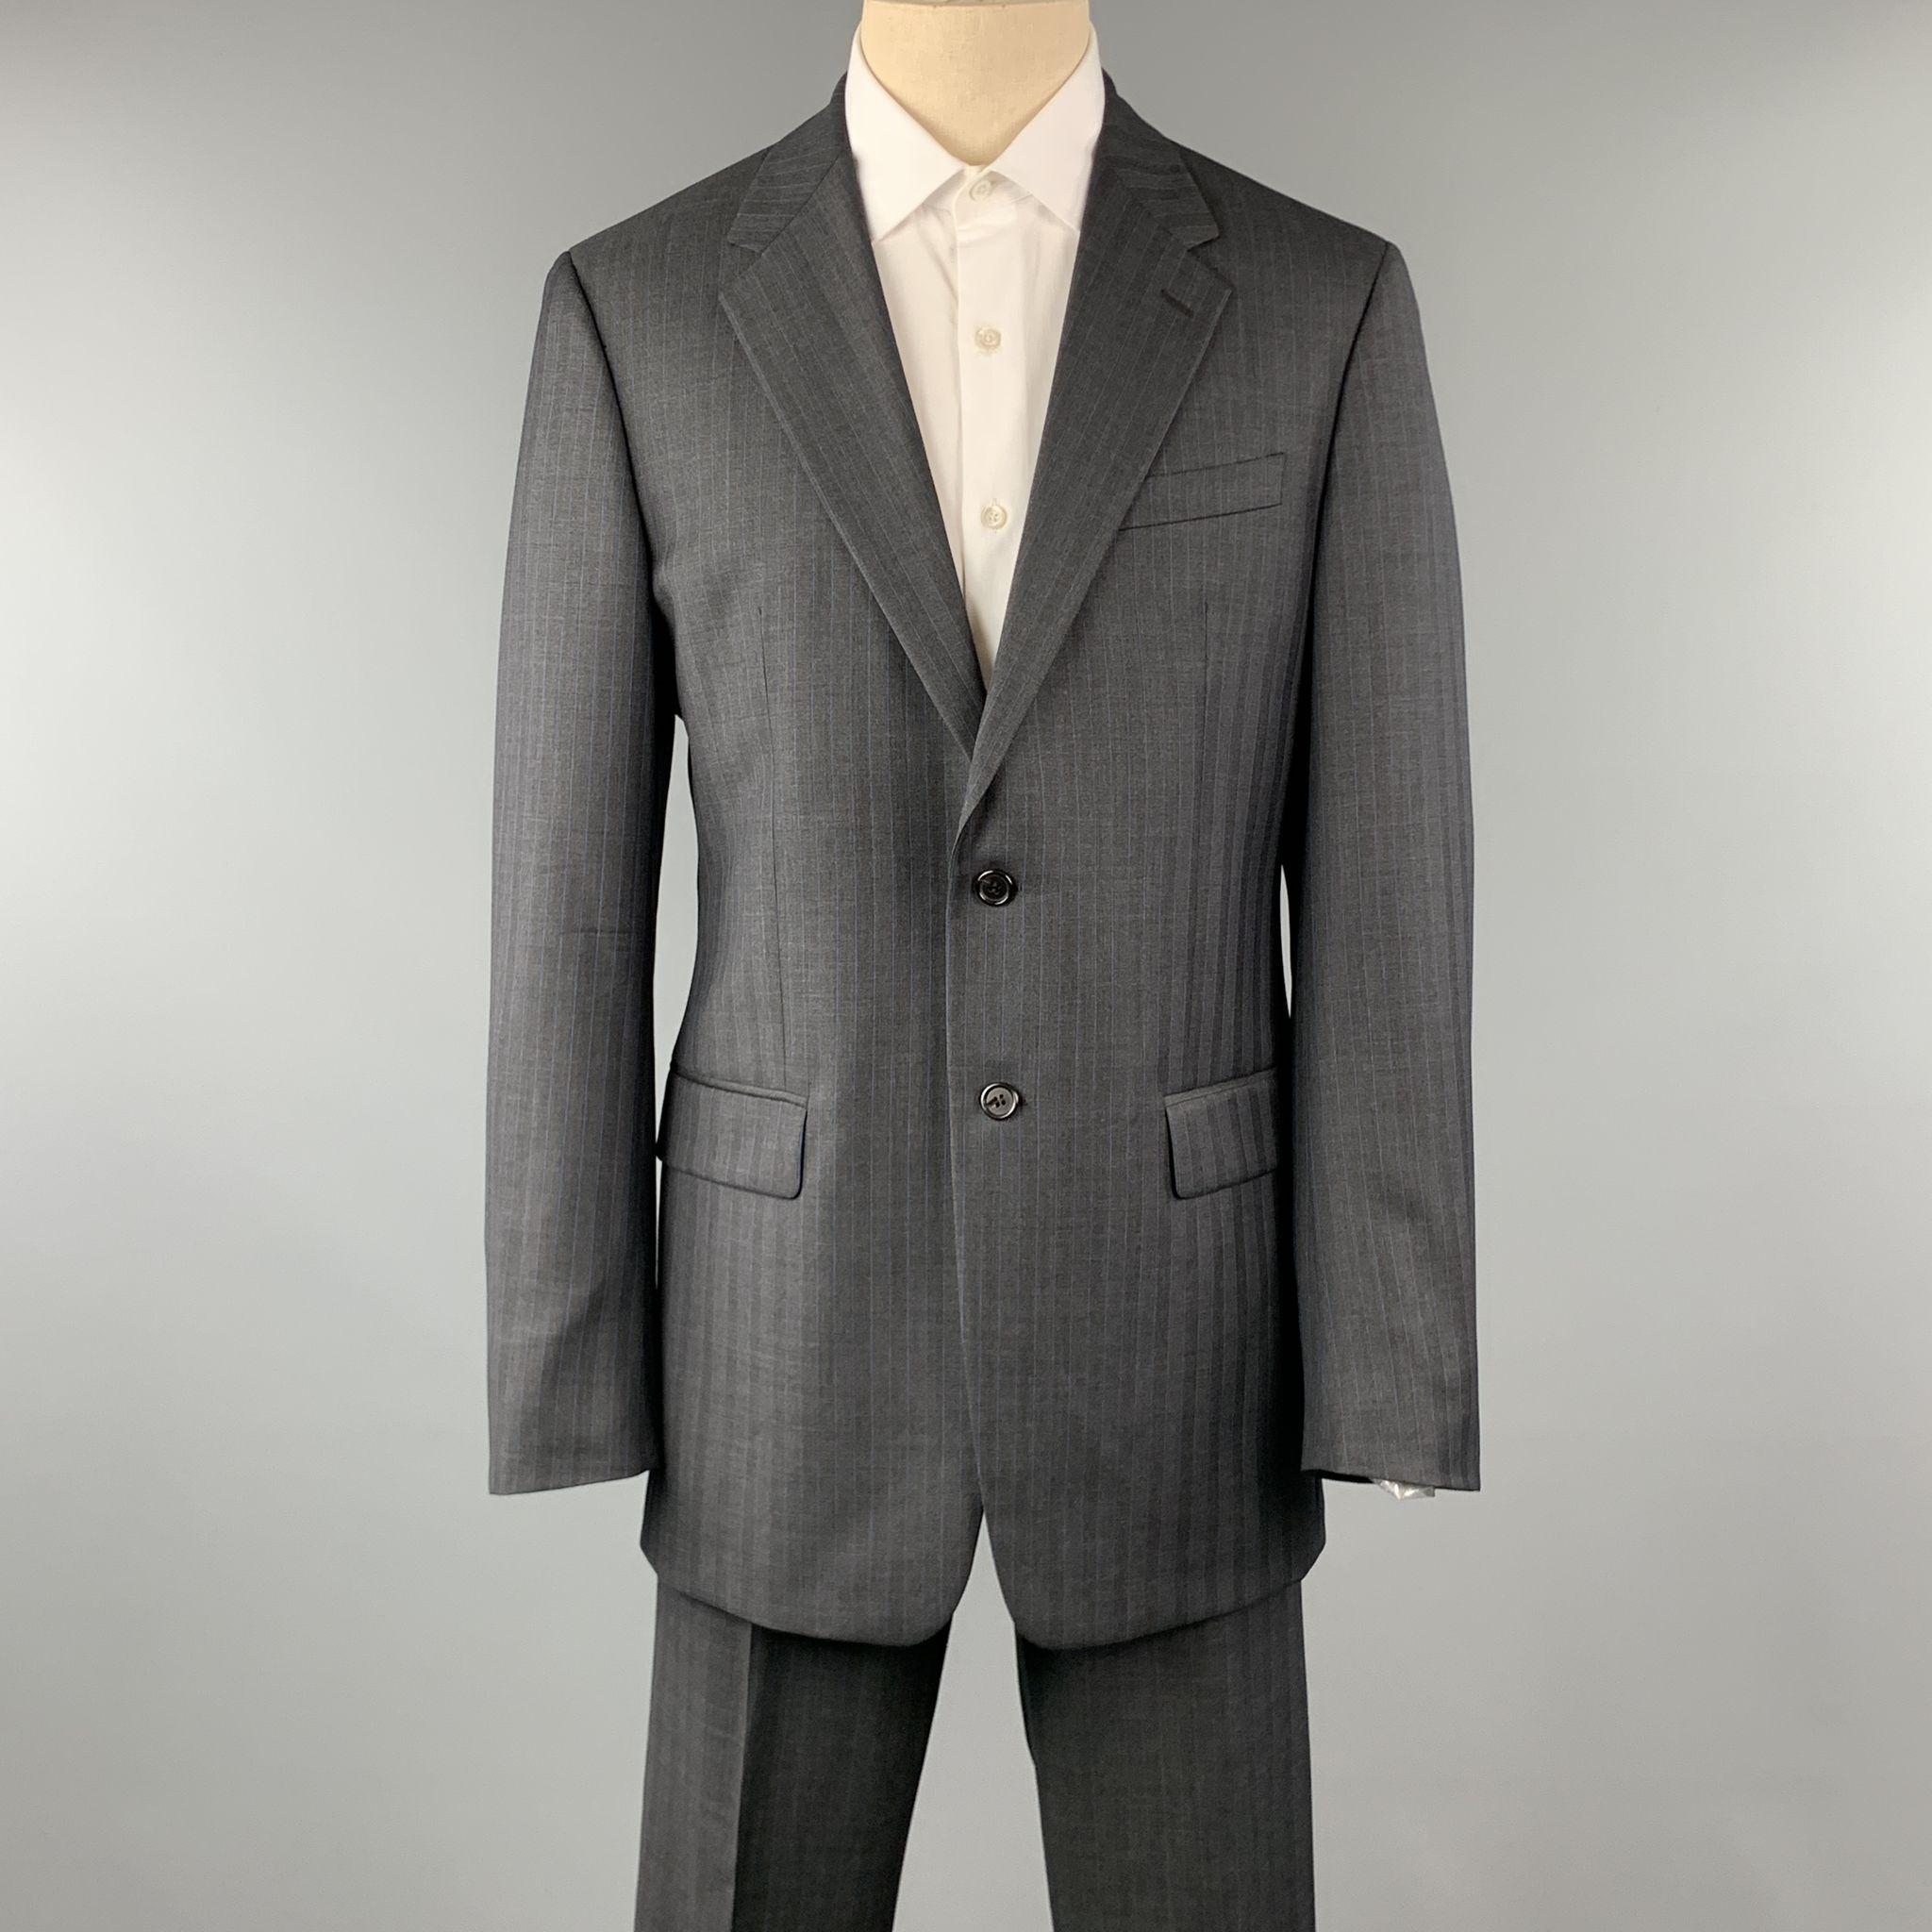 PRADA suit comes in a charcoal stripe wool and includes a single breasted, two button sport coat with notch lapel and matching front trousers. Made in Italy.

Pre-Owned Condition.
Marked: 52 L

Measurements:

-Jacket
Shoulder: 19 in. 
Chest: 42 in.